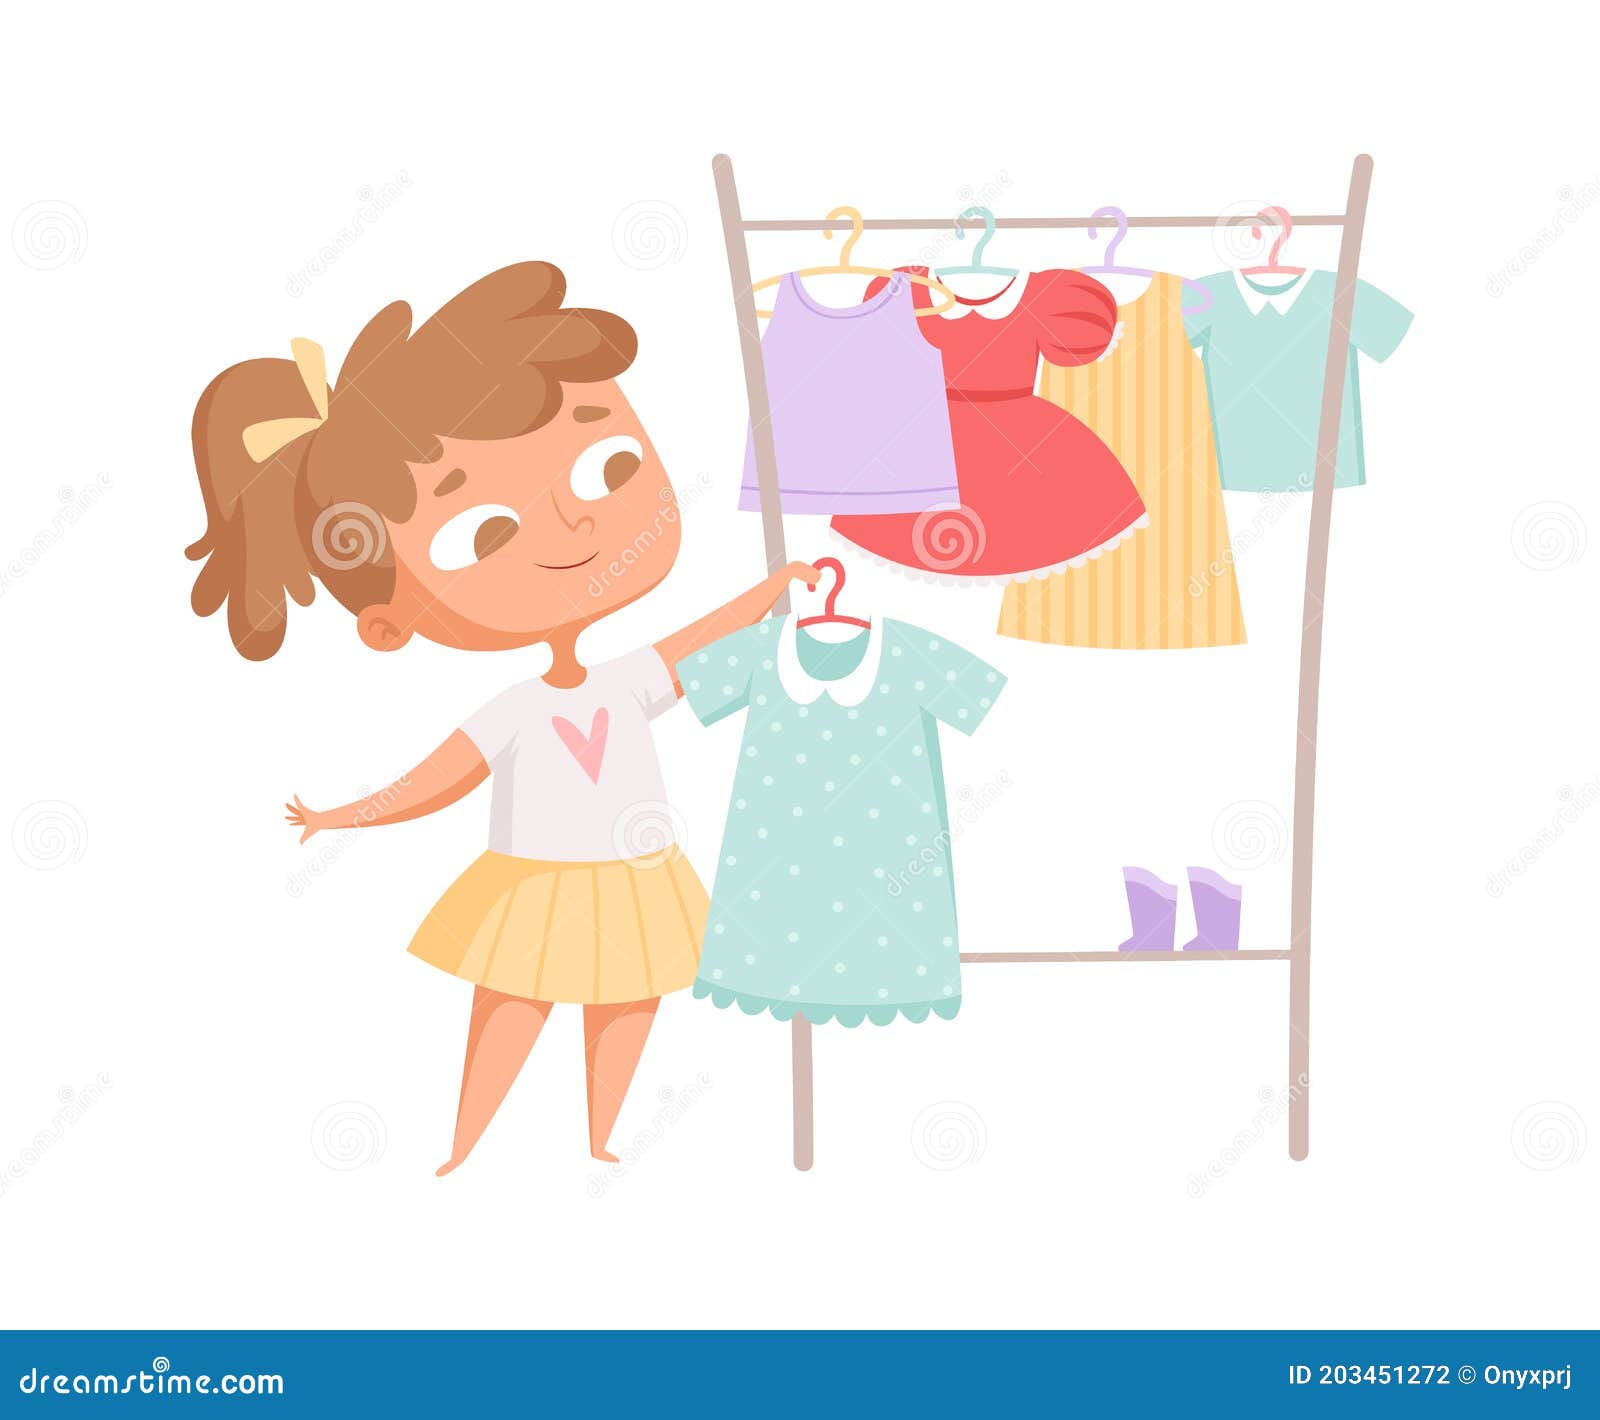 buying clothes. girl and dress, clothes rack. cartoon child in fashion store choosing new look  